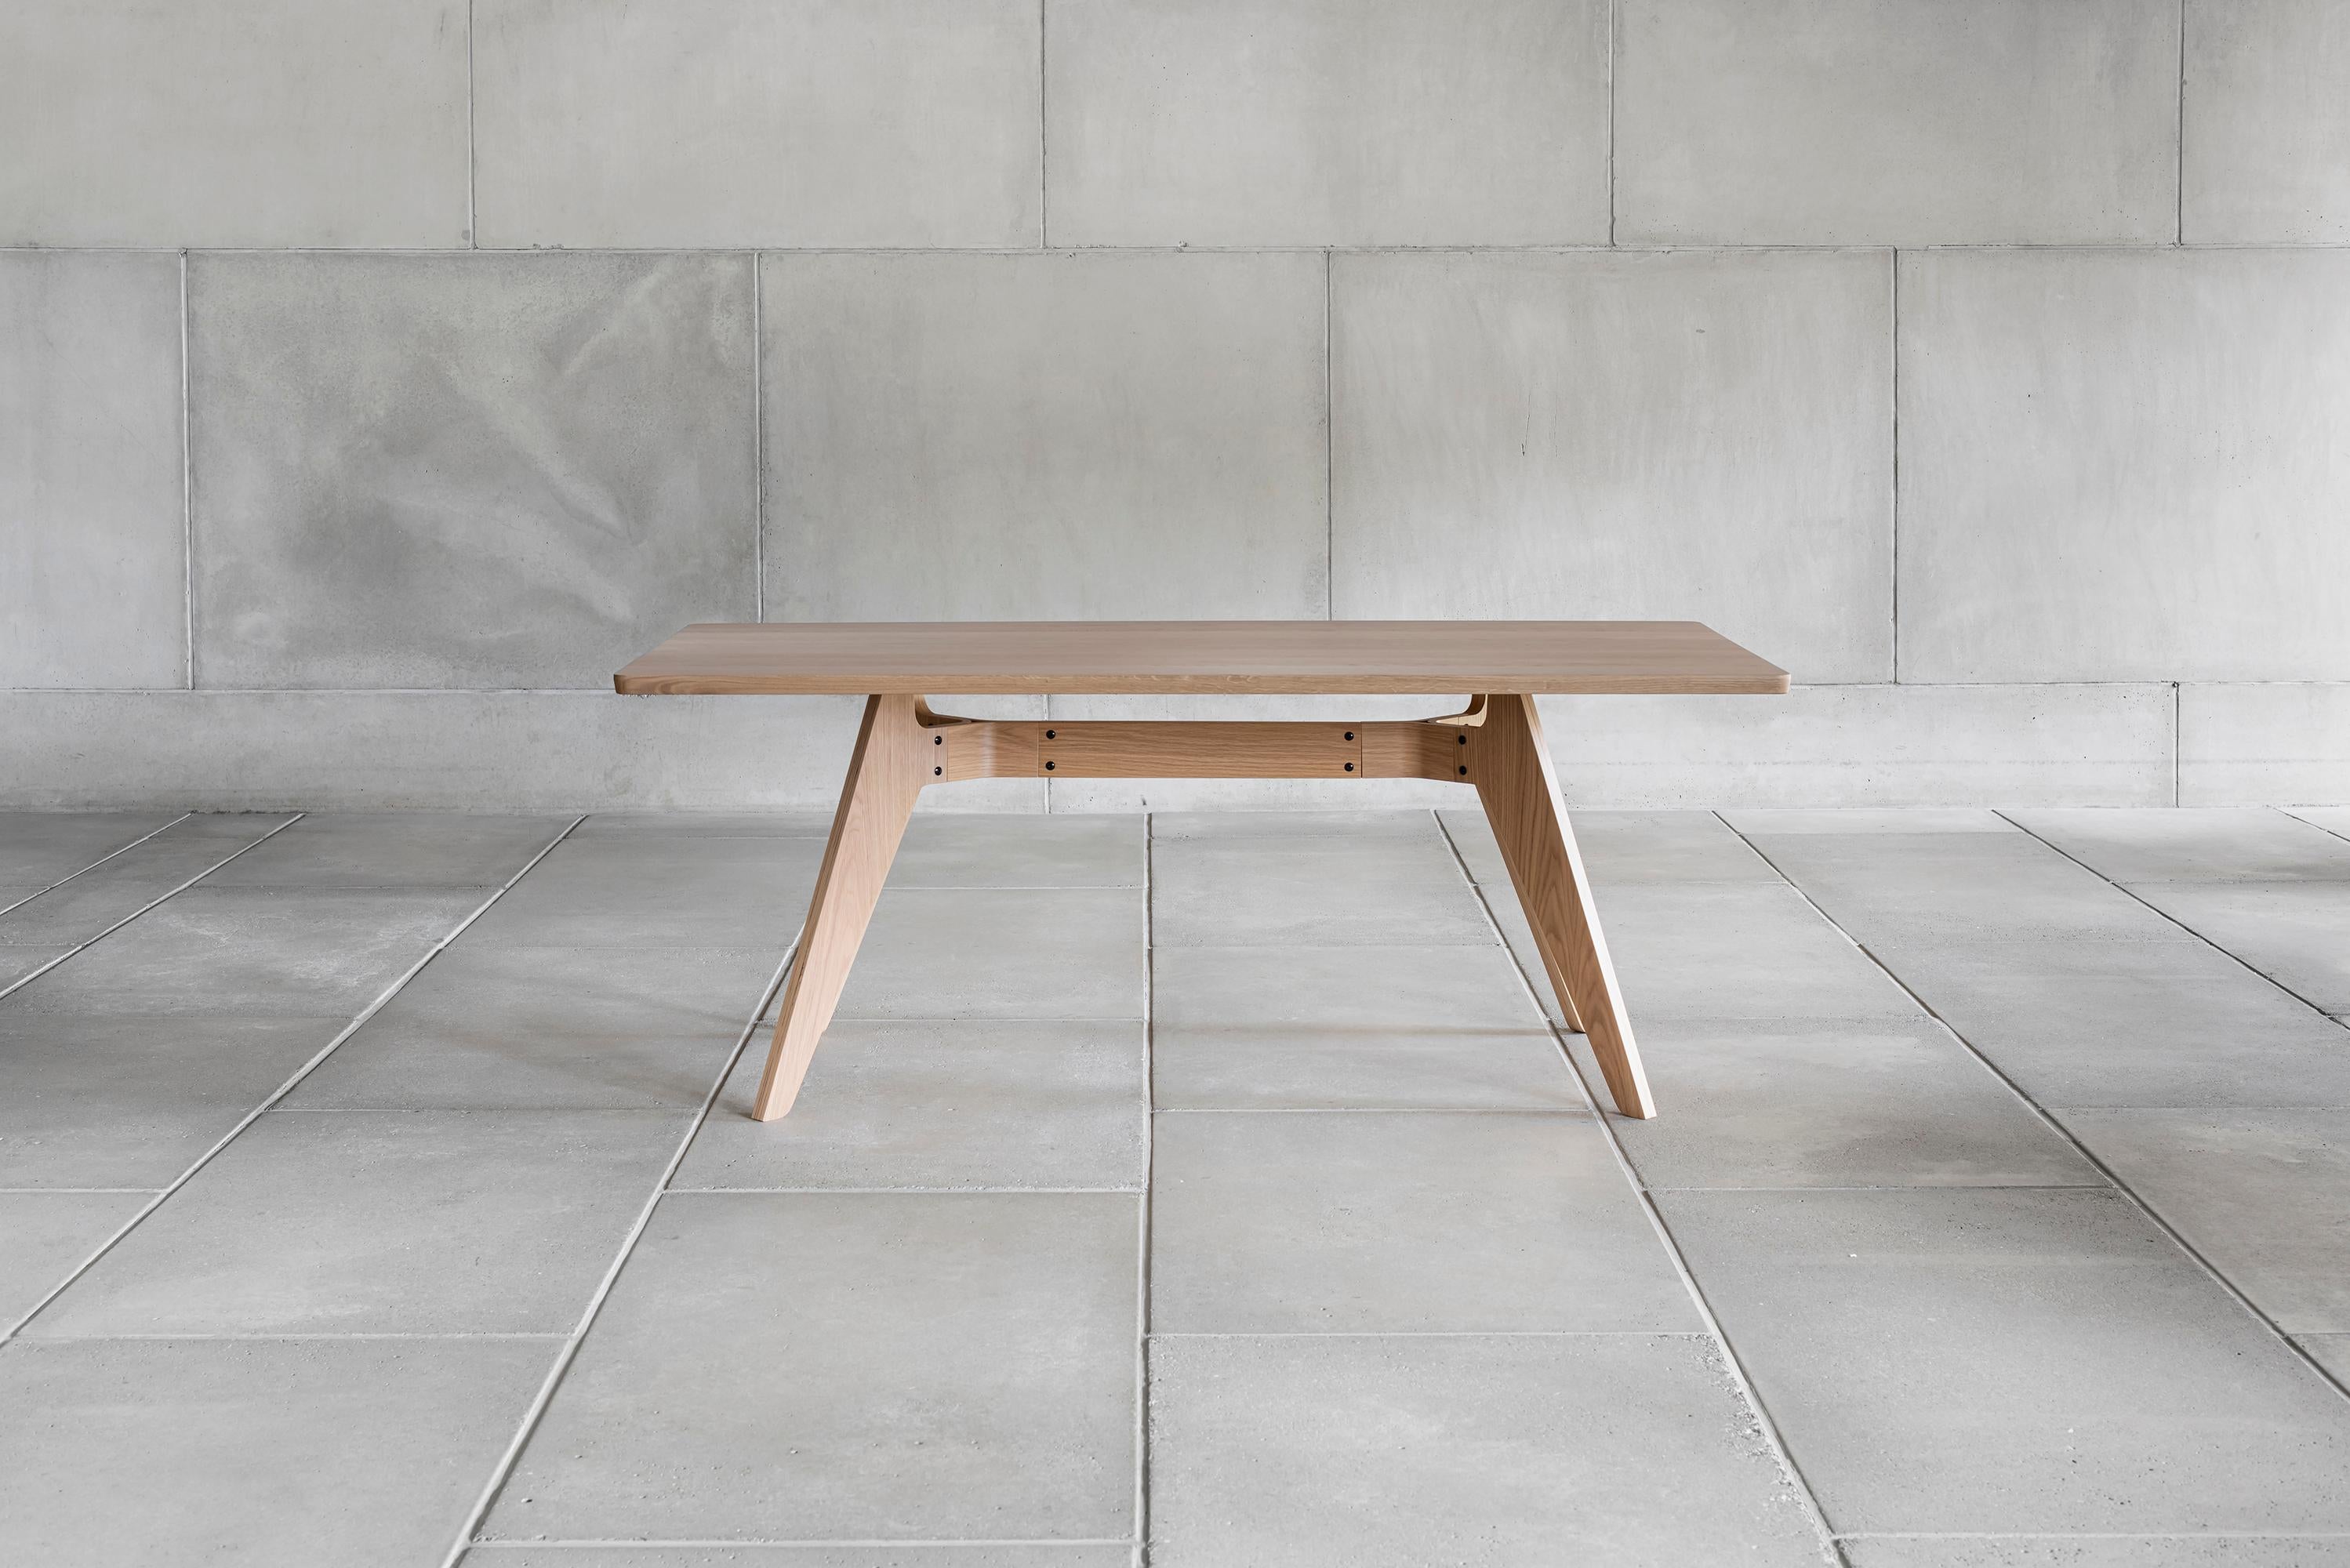 Lavitta dining table 240 cm designed by Timo Mikkonen & Antti Rouhunkoski
Collection Lavitta 2016 by Poiat.

Model shown on picture
Dimensions : H. 72 cm x 240 cm x 90 cm
Color : Oak 

The Lavitta Collection draws upon the influences of